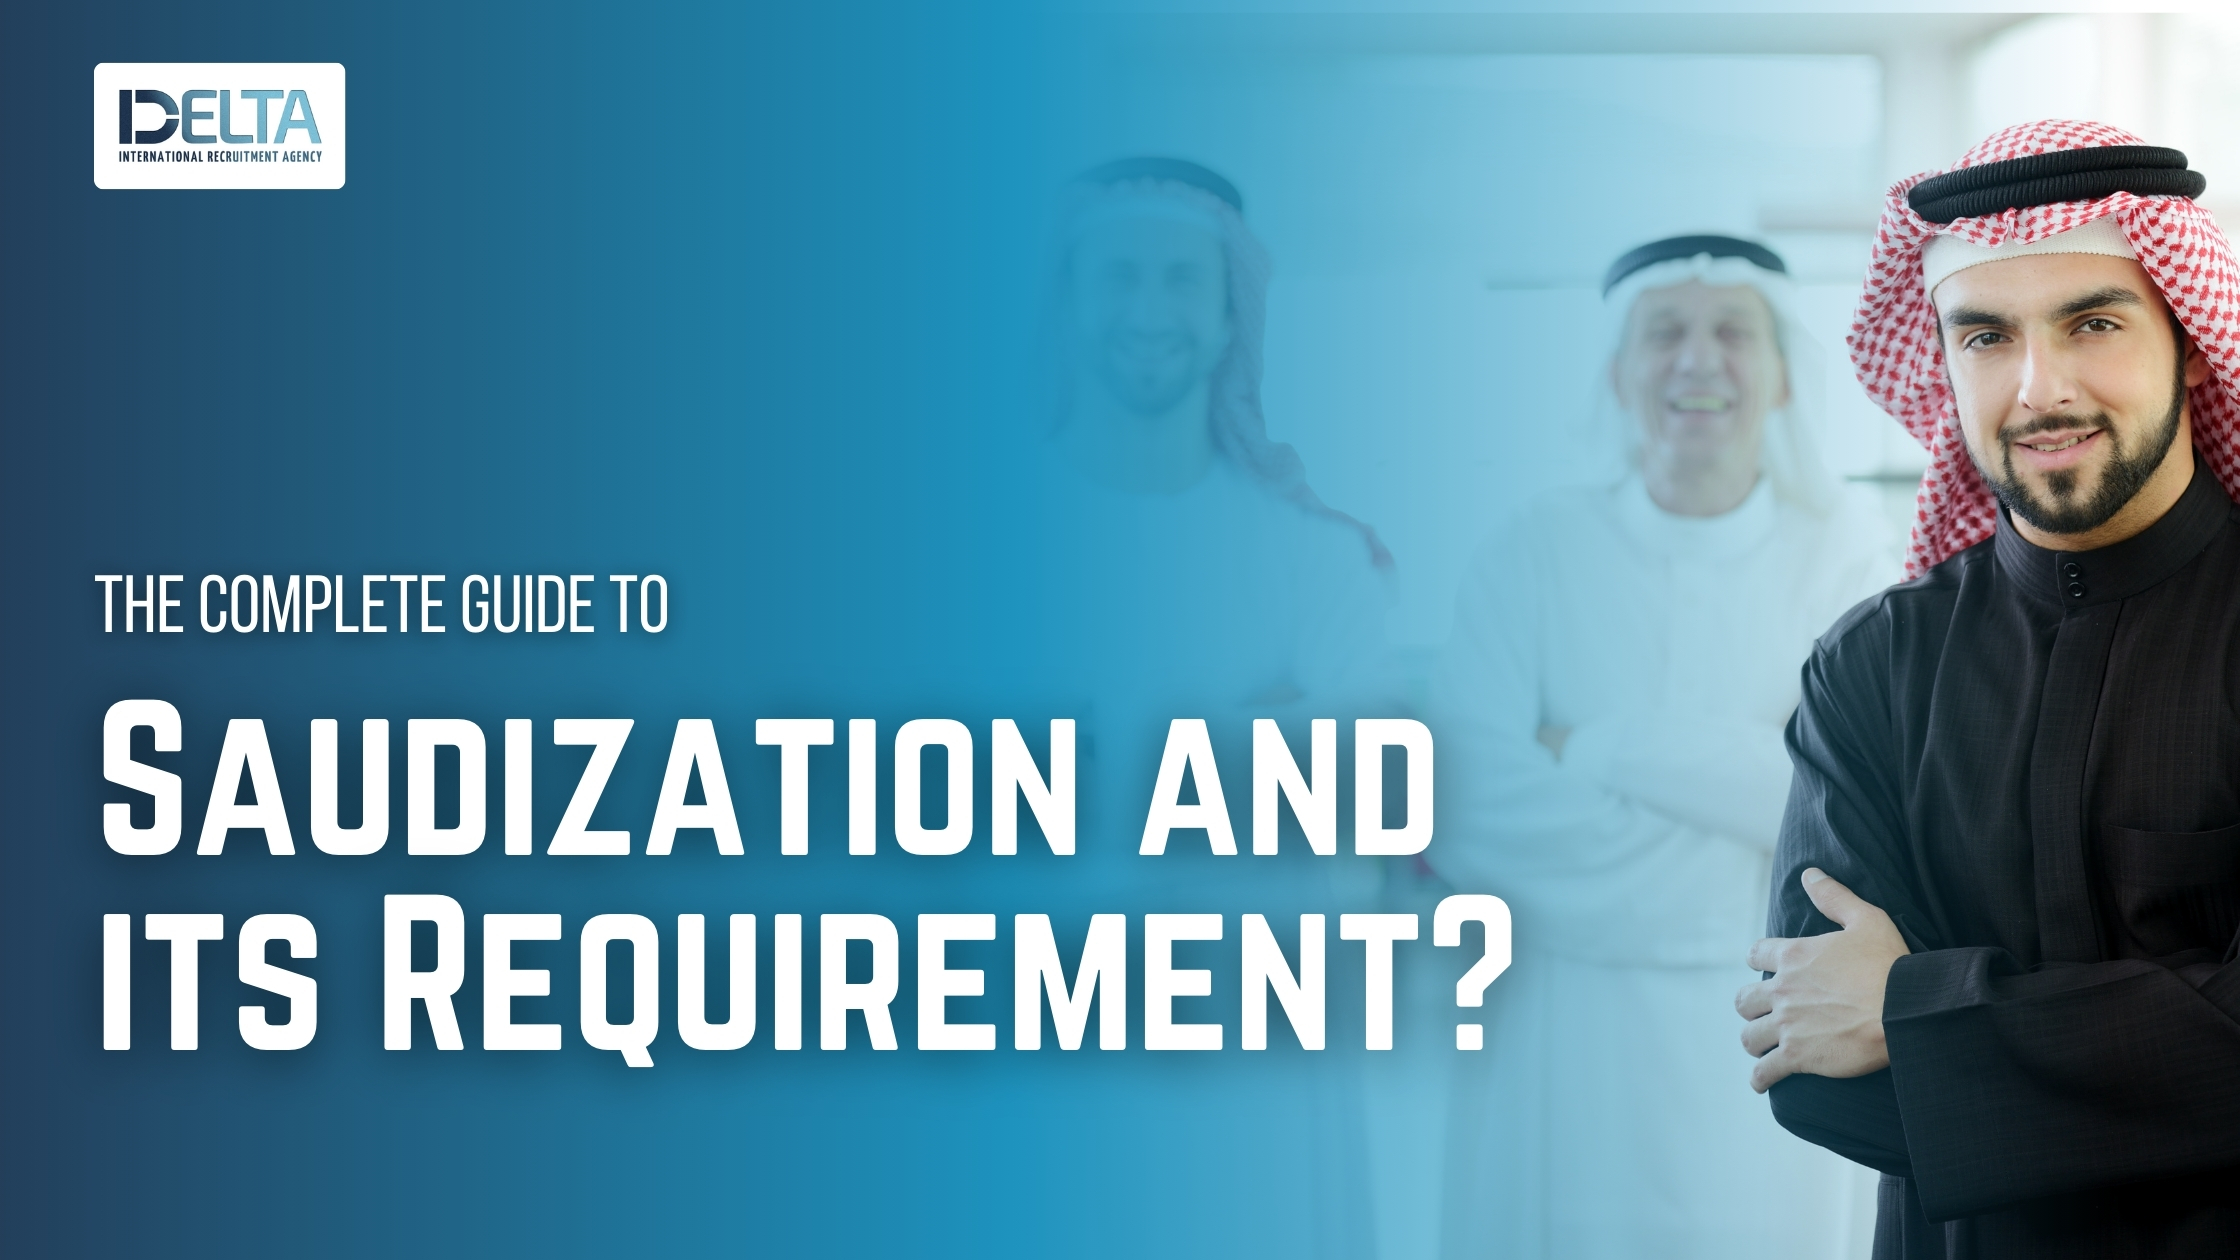 The Complete Guide to Saudization and its Requirement?